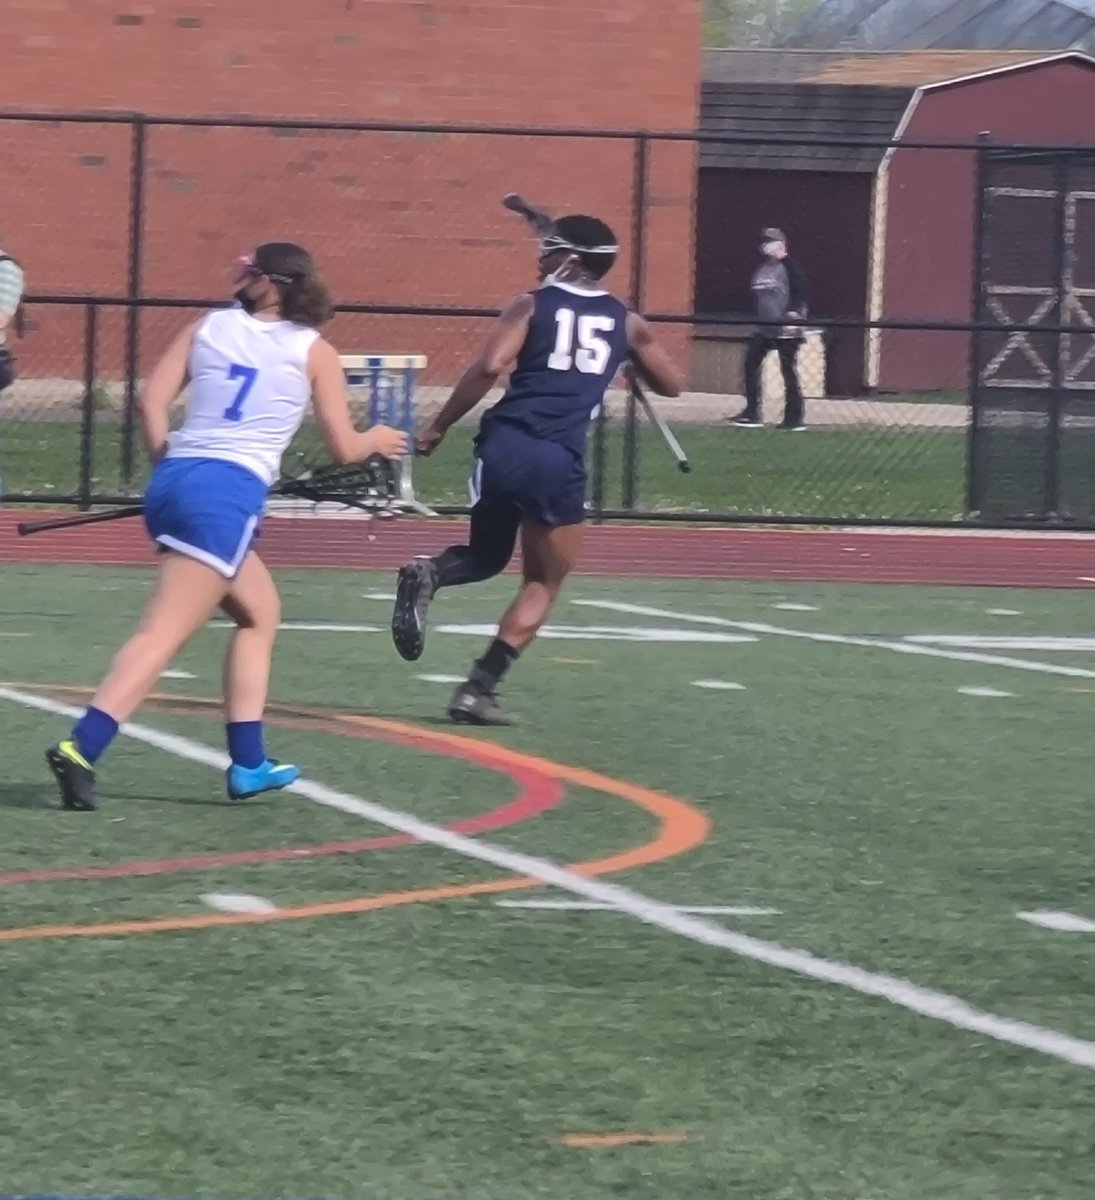 My daughter had a Lacrosse game today, the other team had a male player in a skirt! Dominating these girls! We could not get a straight answer why he was on the girls team! 1st they needed a sub and it was allowed. Then they don't have a boys team... WTF! Look at him!